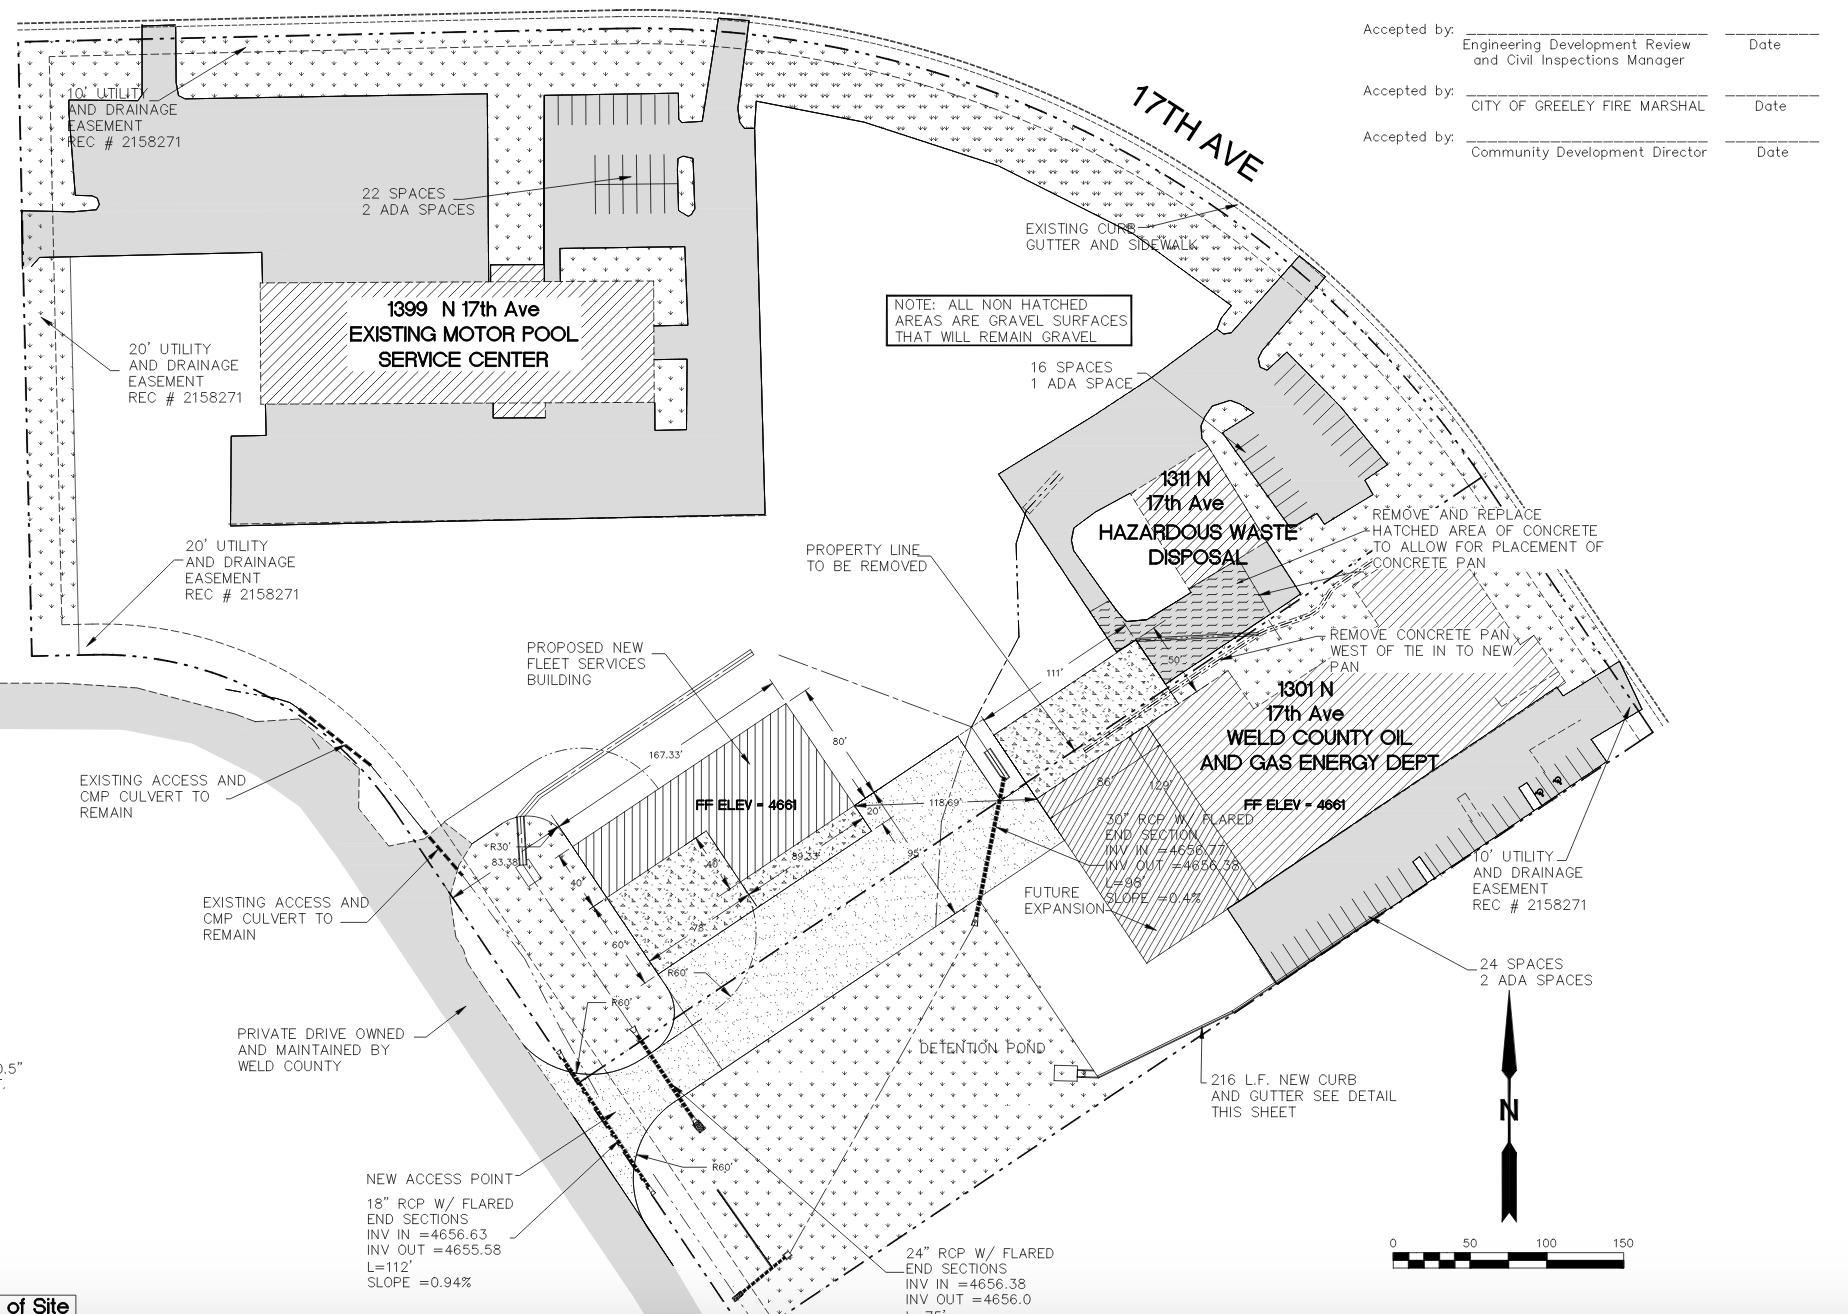 Site plan for Weld County Motor Service Pool expansion in Greeley, CO